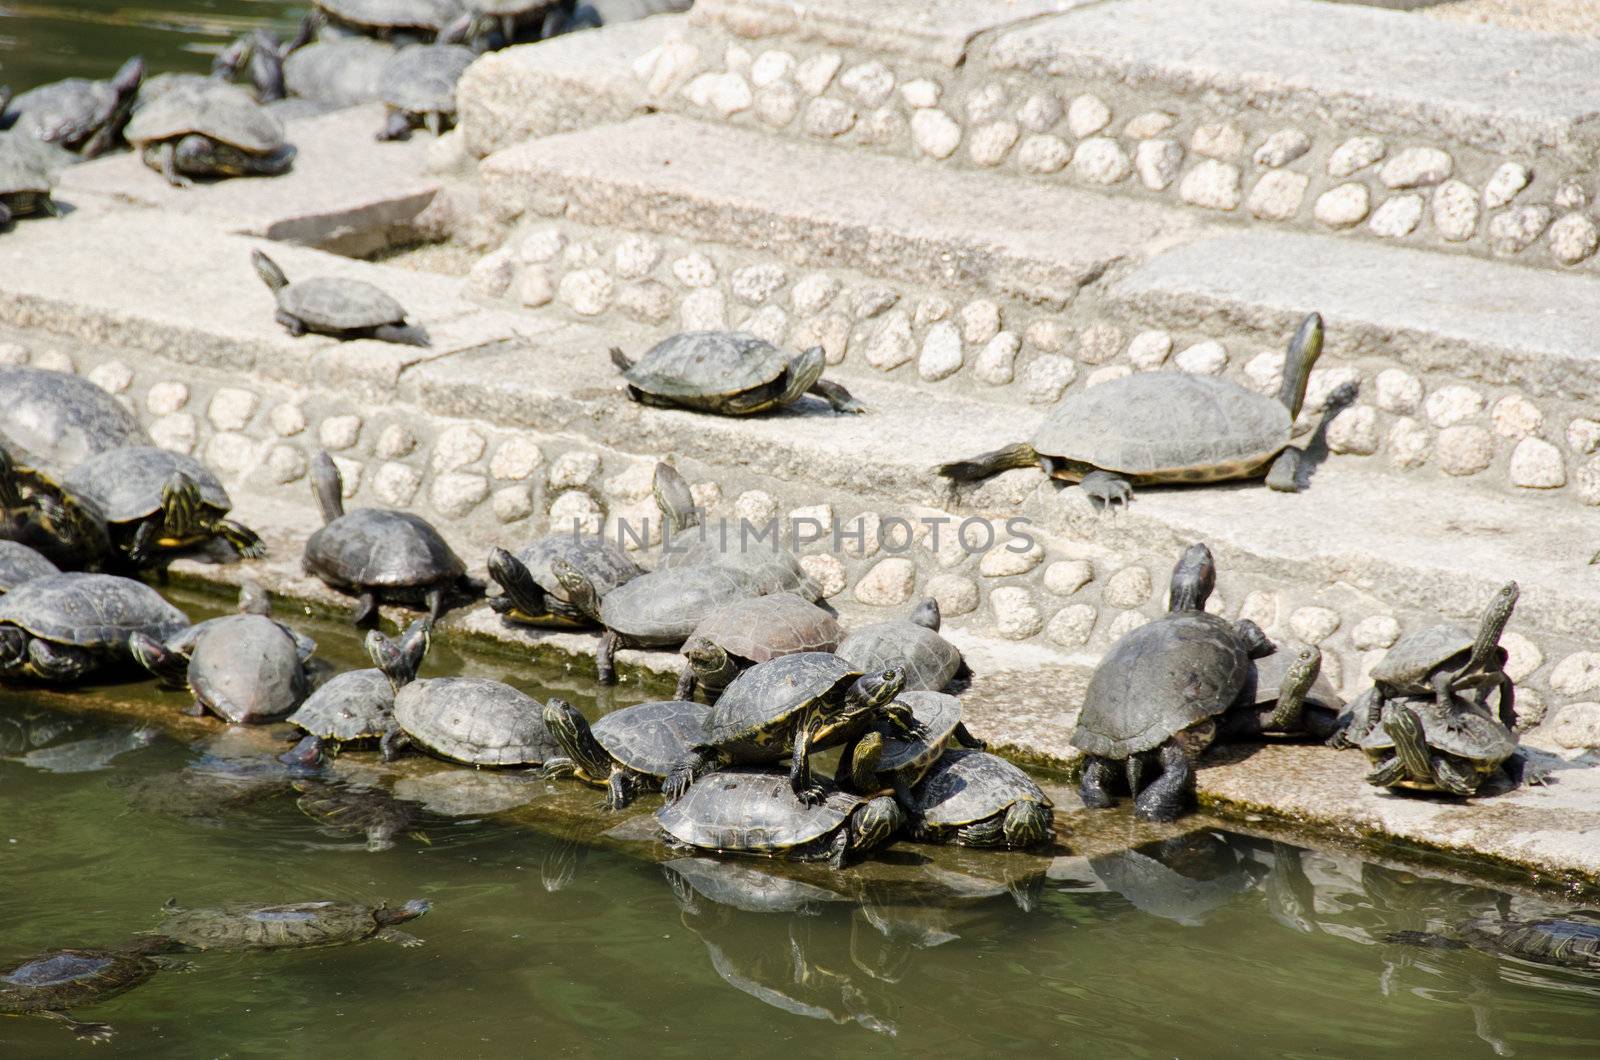 Turtles on stairs in a temple by Arrxxx